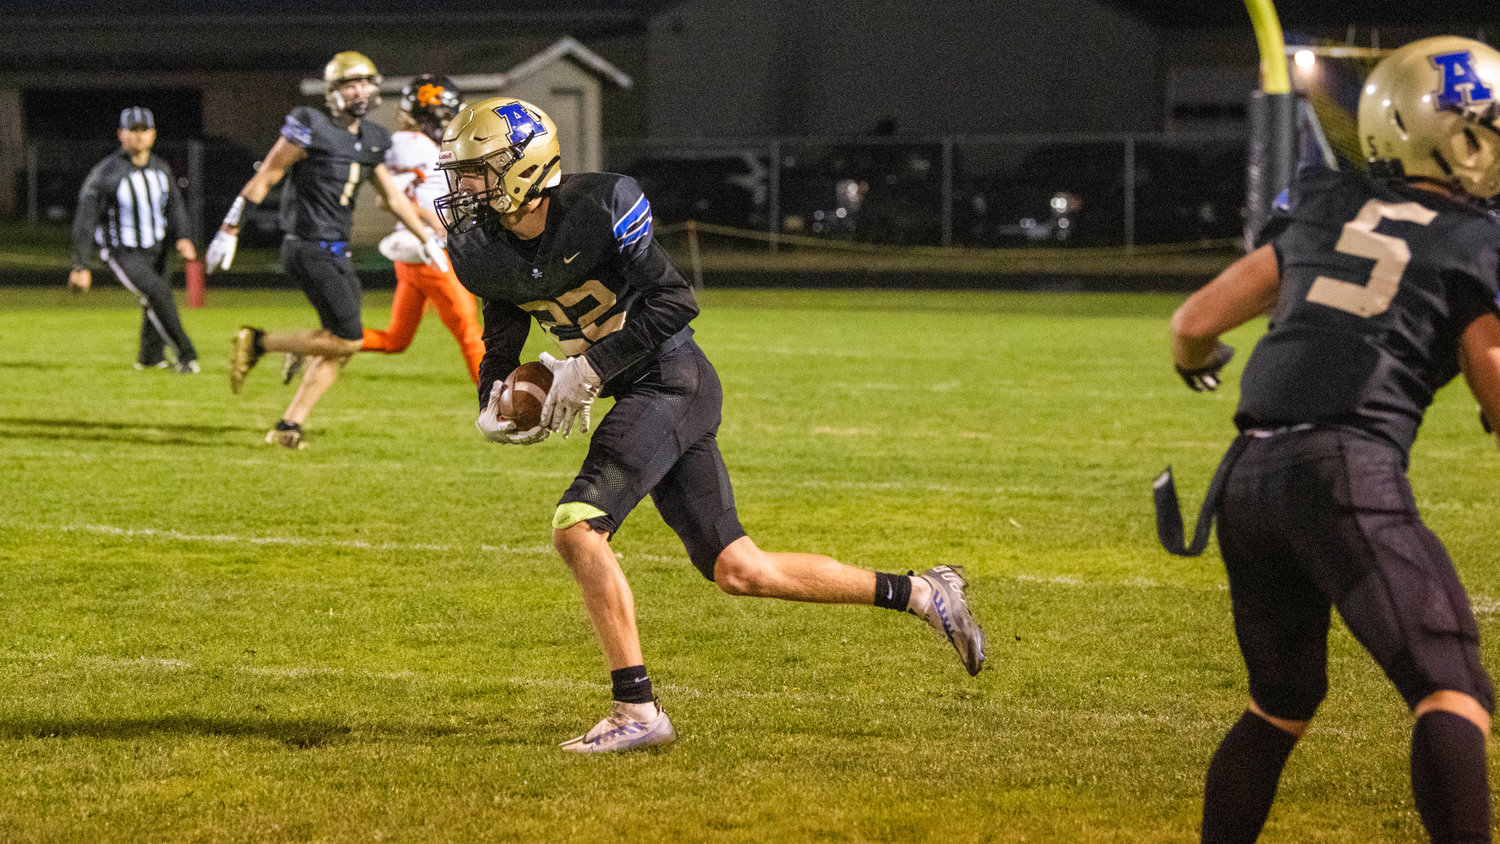 Adna senior Seth Meister (22) runs with the football after making an interception Thursday night during a game against Kalama.